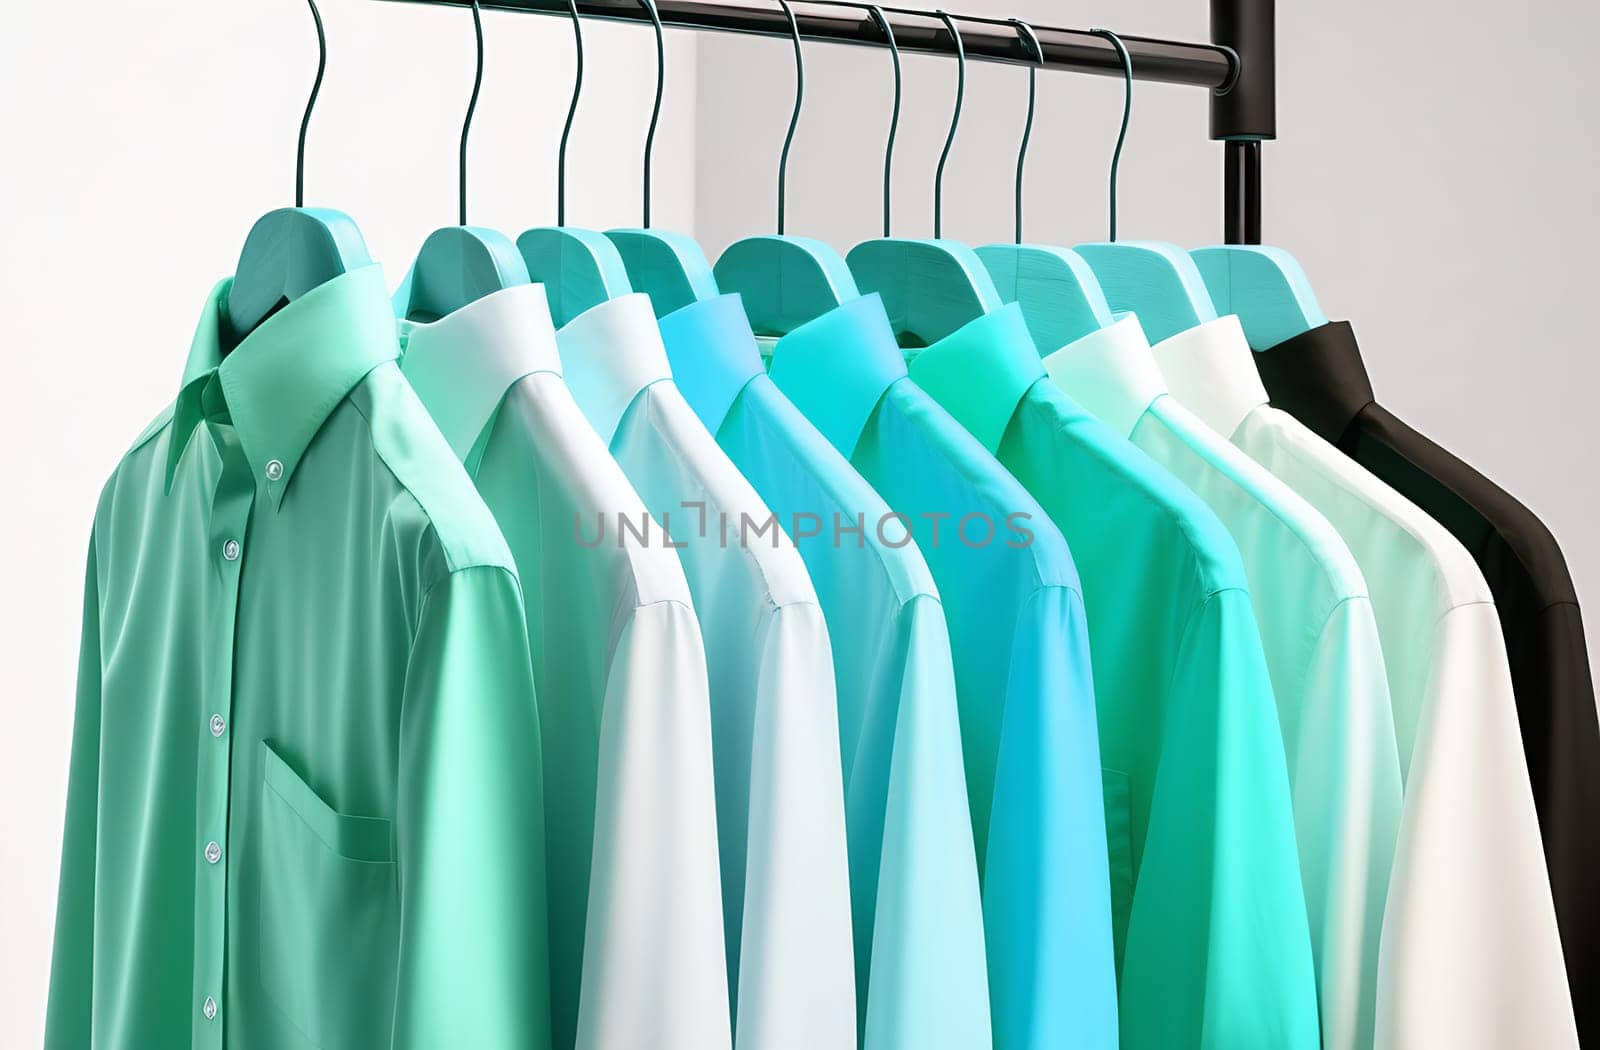 Men's shirts hanging in a row on a hanger, close-up, clothing and fashion concept by claire_lucia